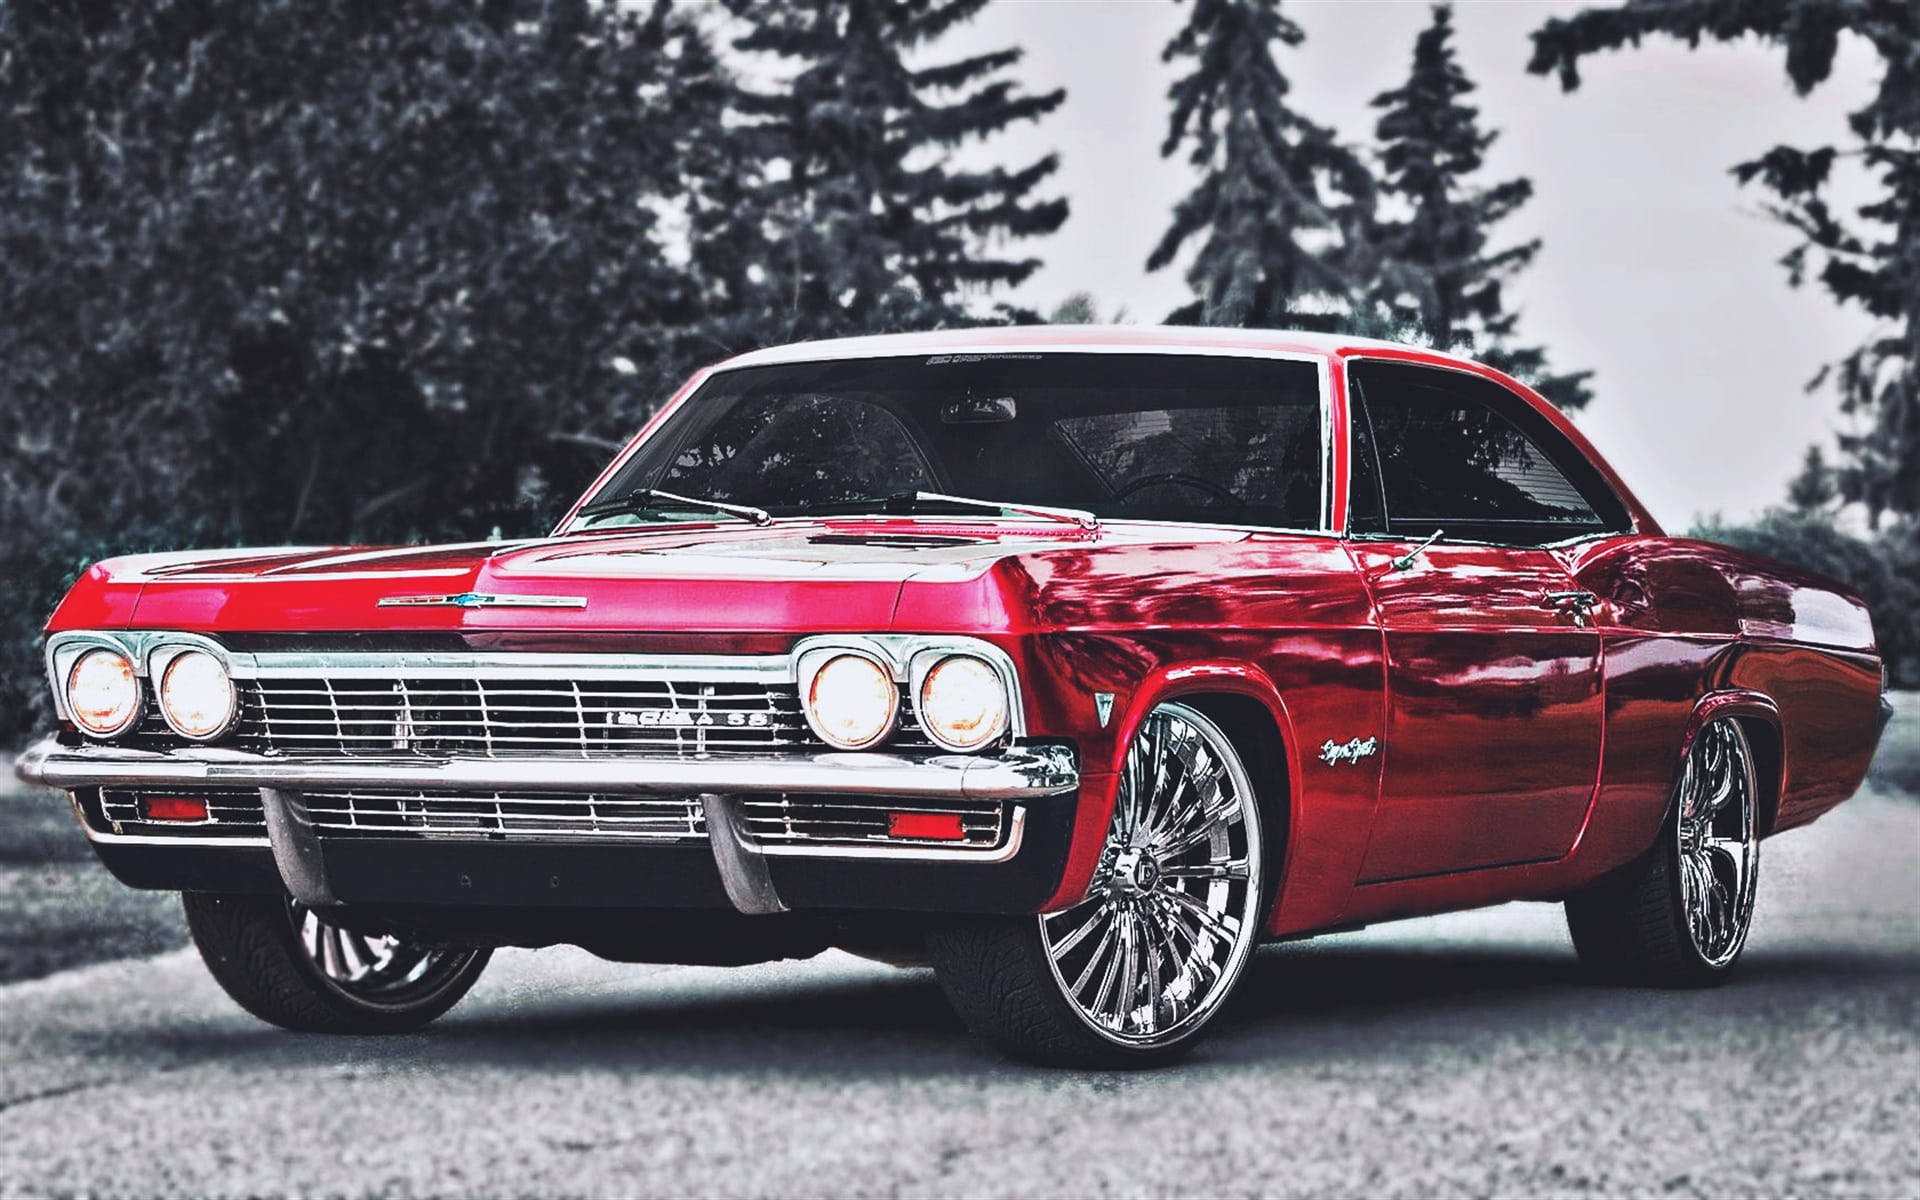 Classic Shine Of A 1967 Chevrolet Impala In Metallic Red